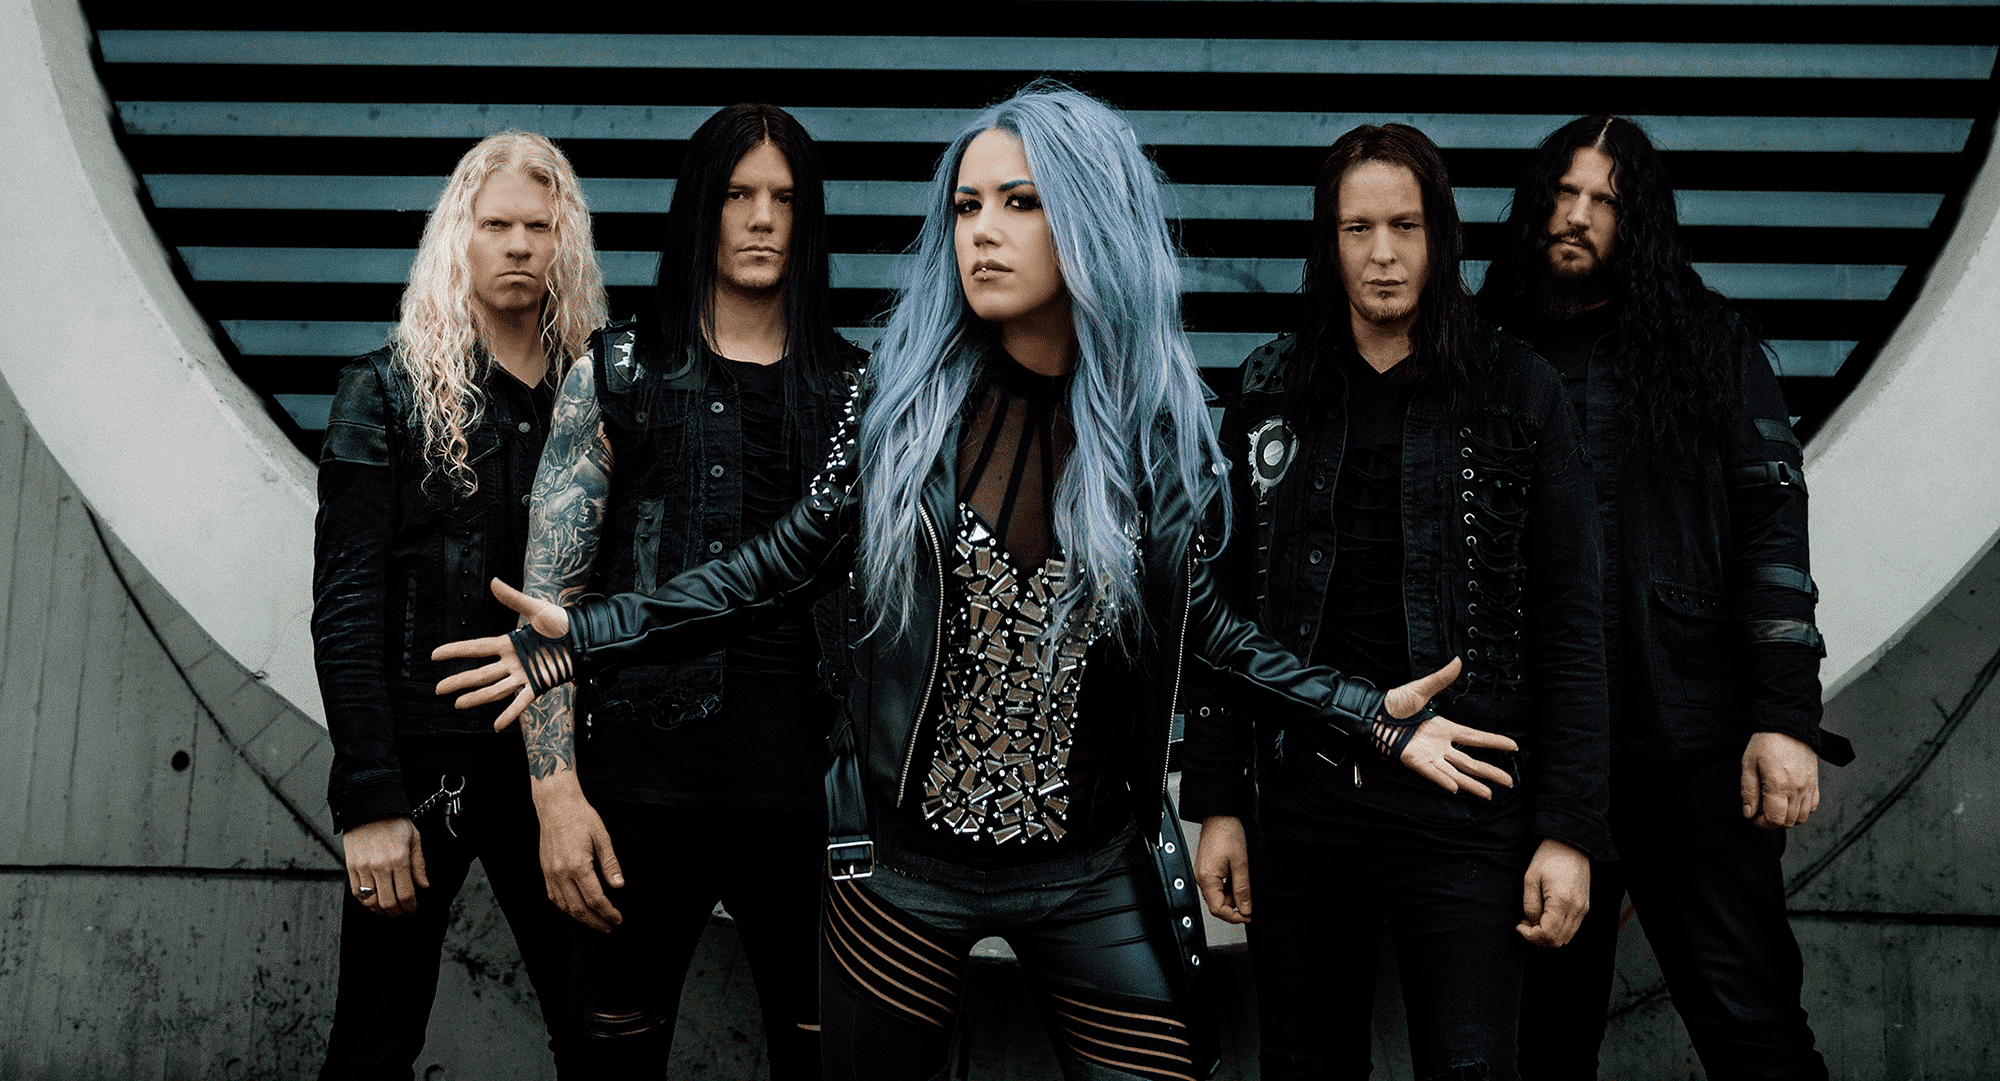 Arch Enemy's 'Will To Power' enters charts worldwide - SOUNDCHECK